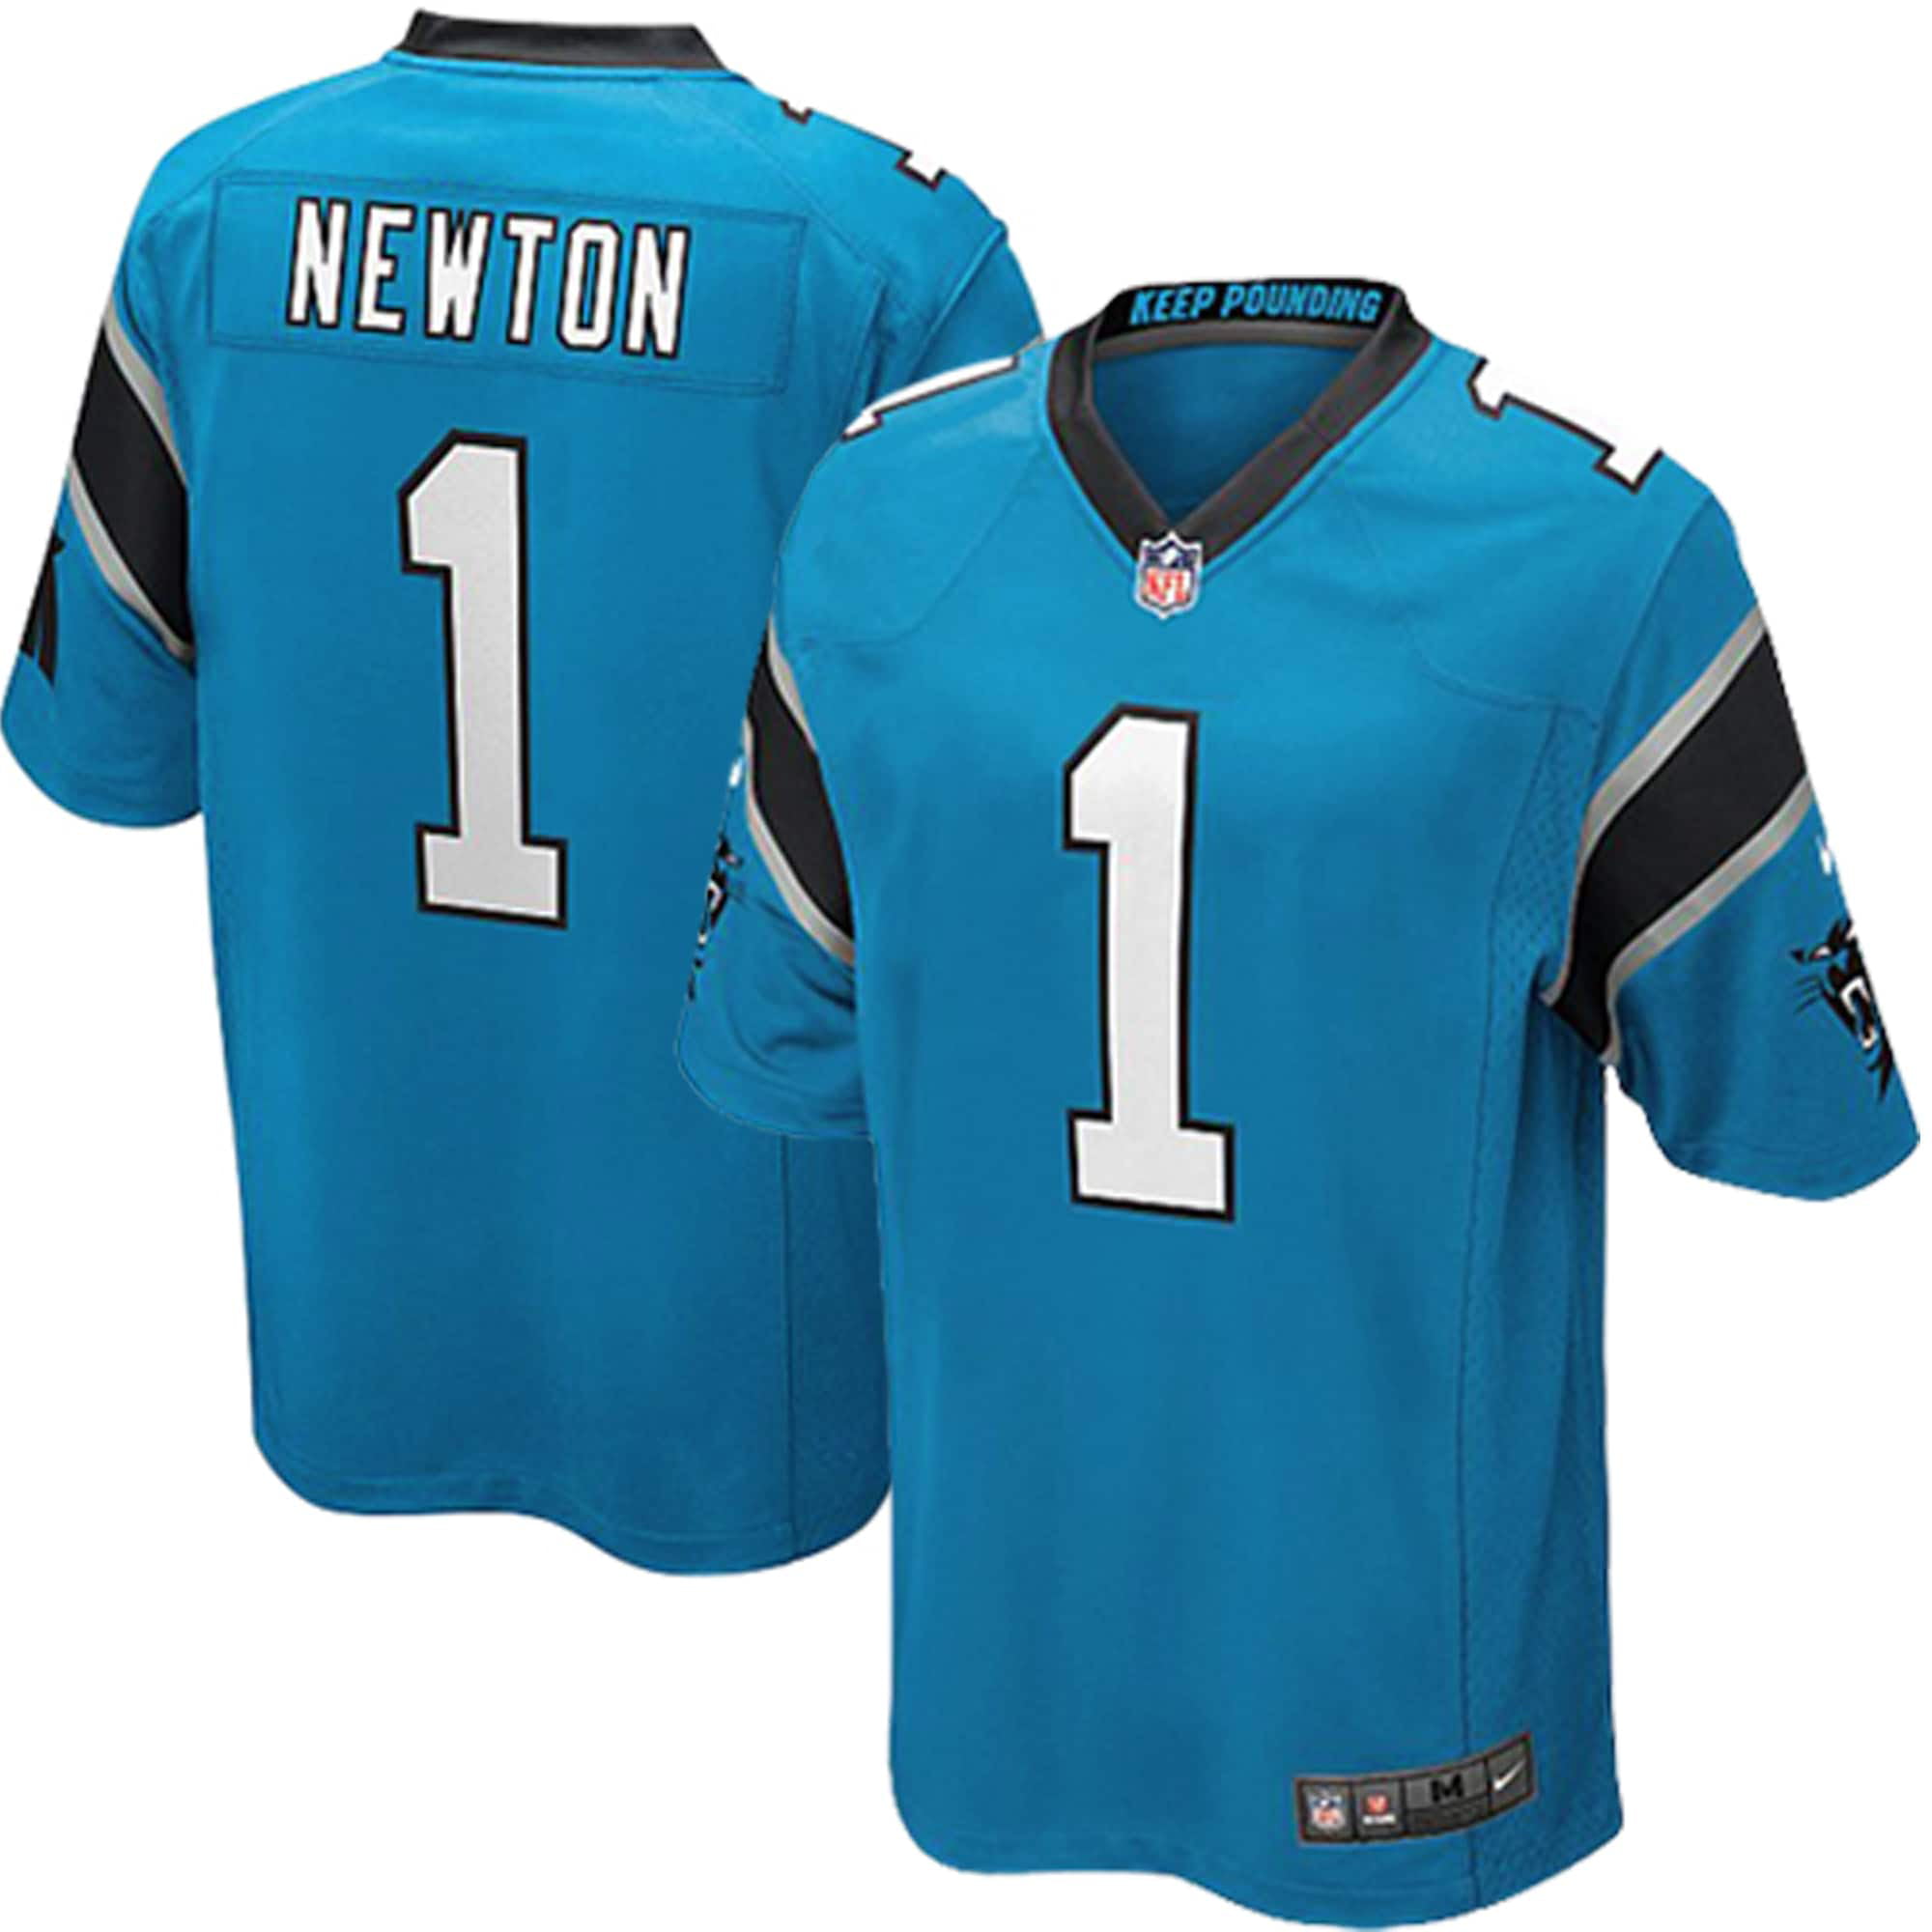 panthers all blue jersey